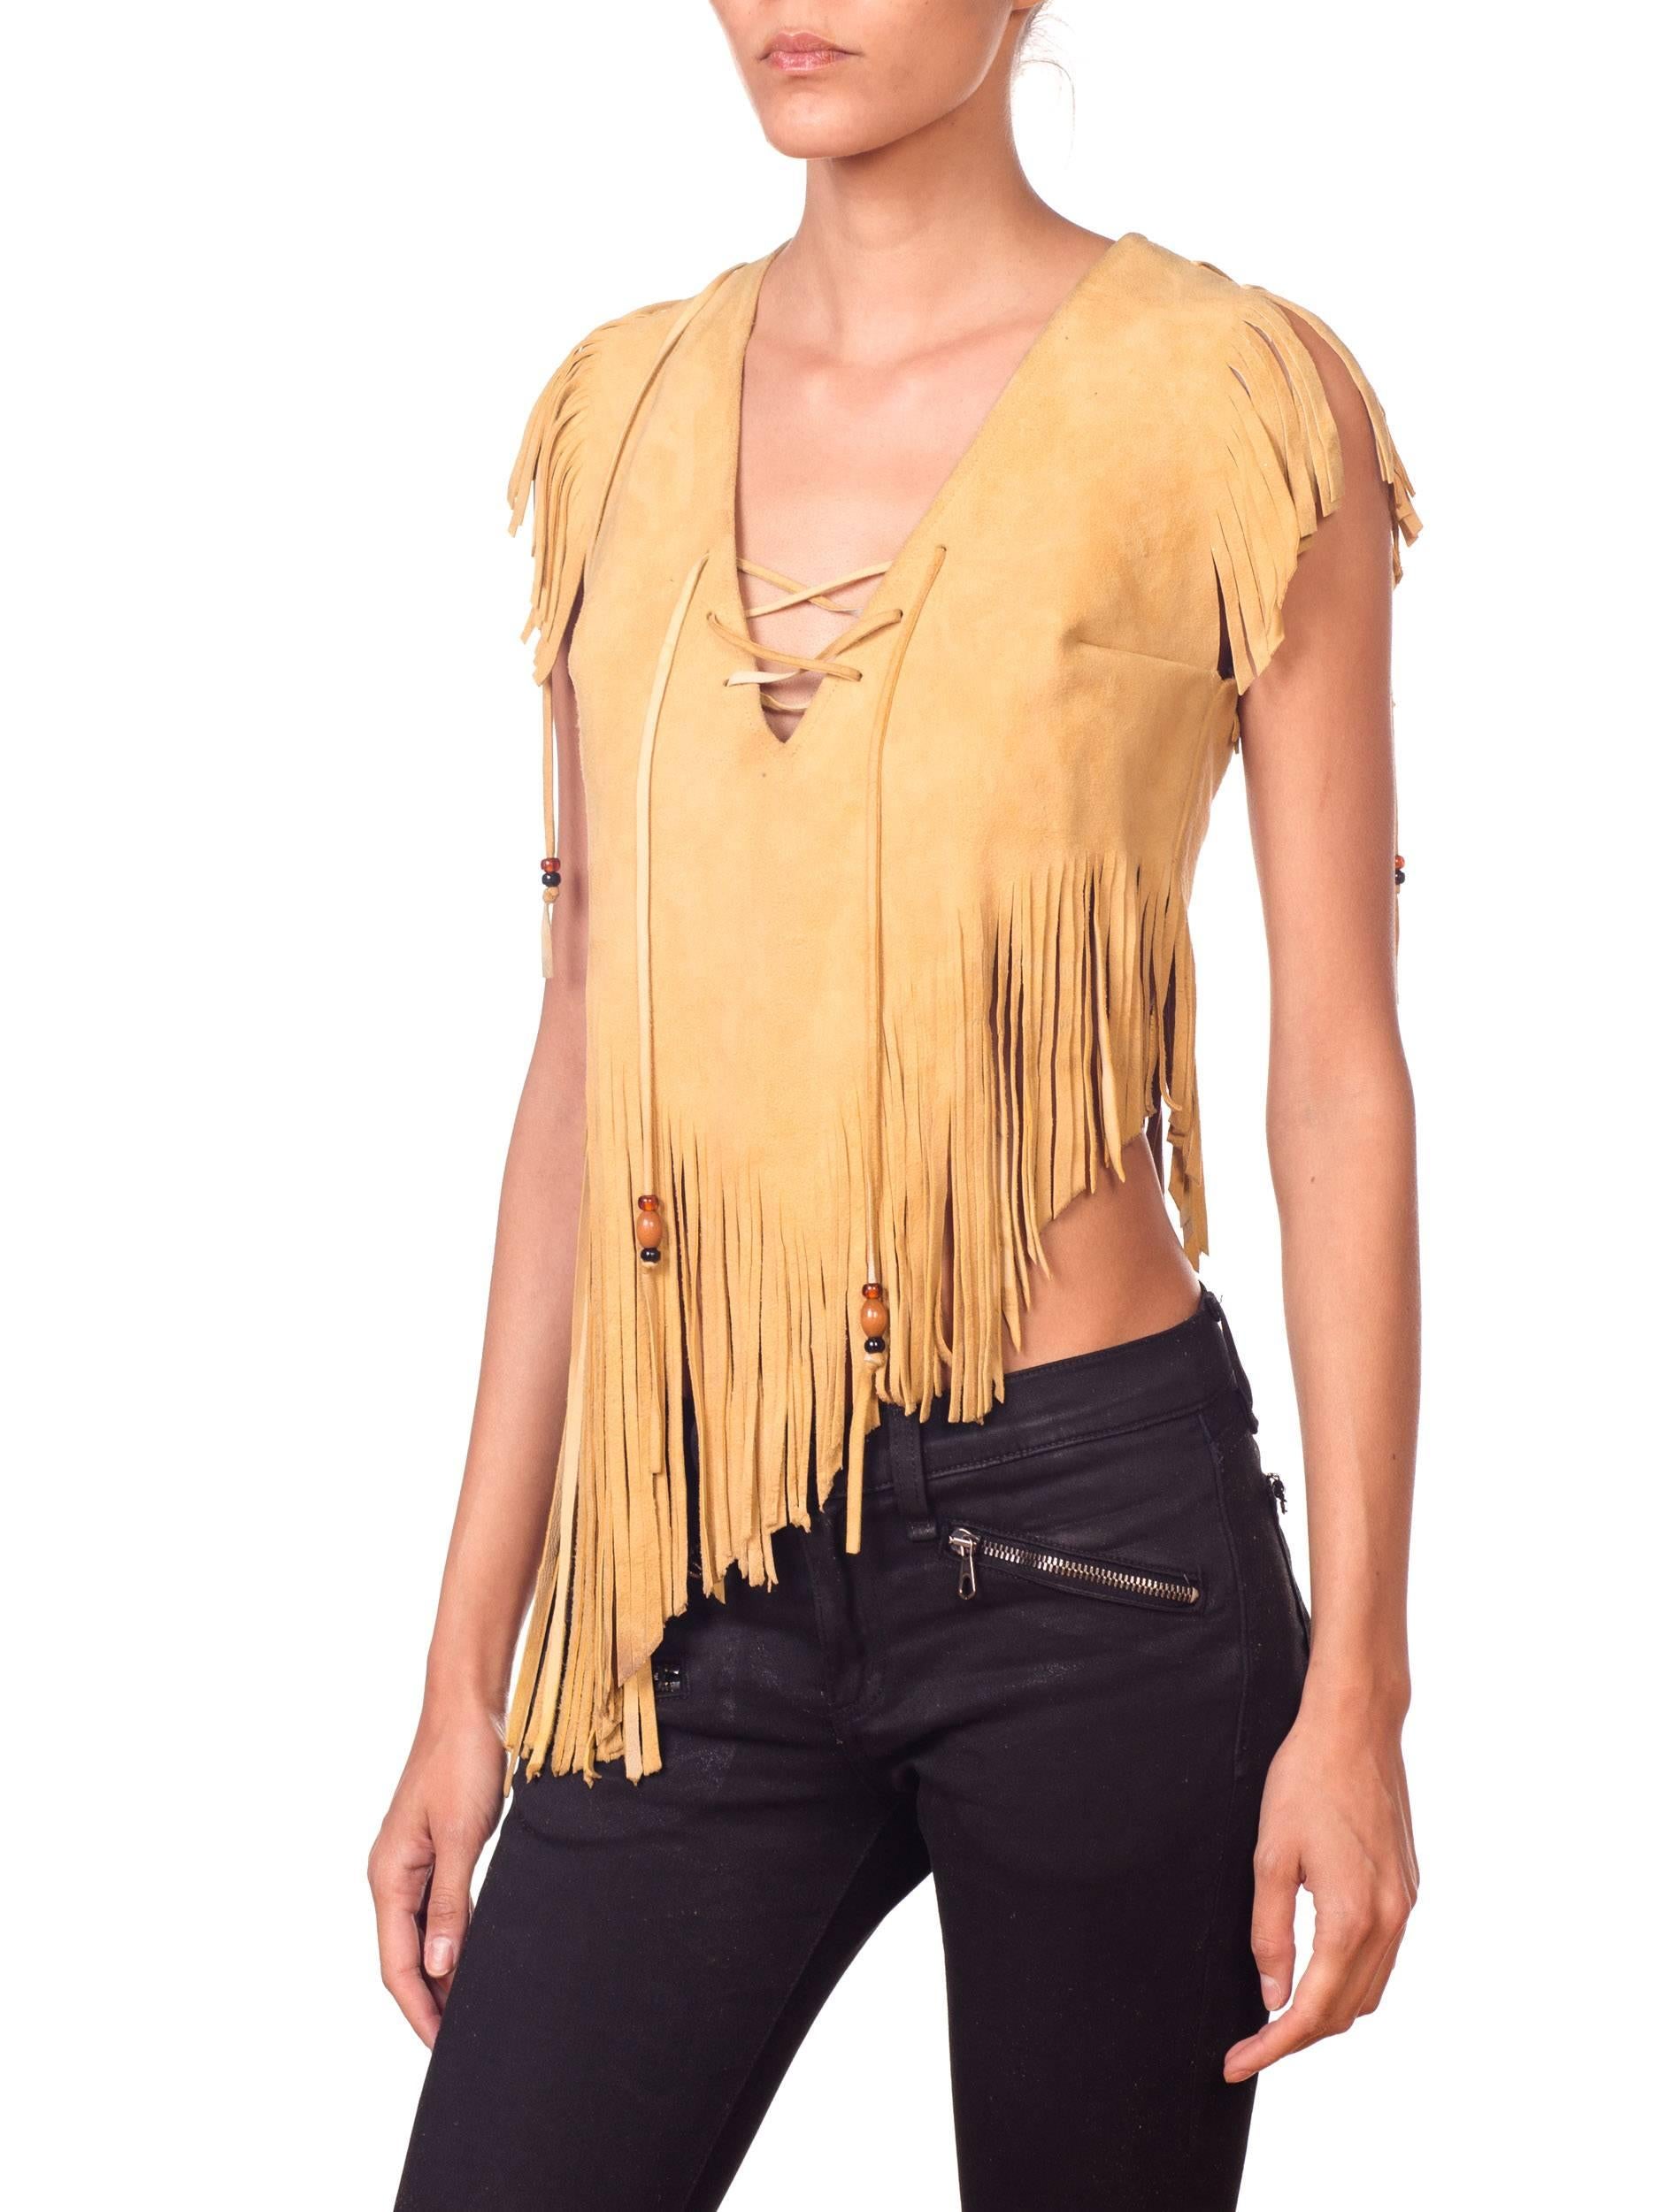 Hand cut leather fringe top from the 1970s with lace-up detail in the front and a full back zipper. 